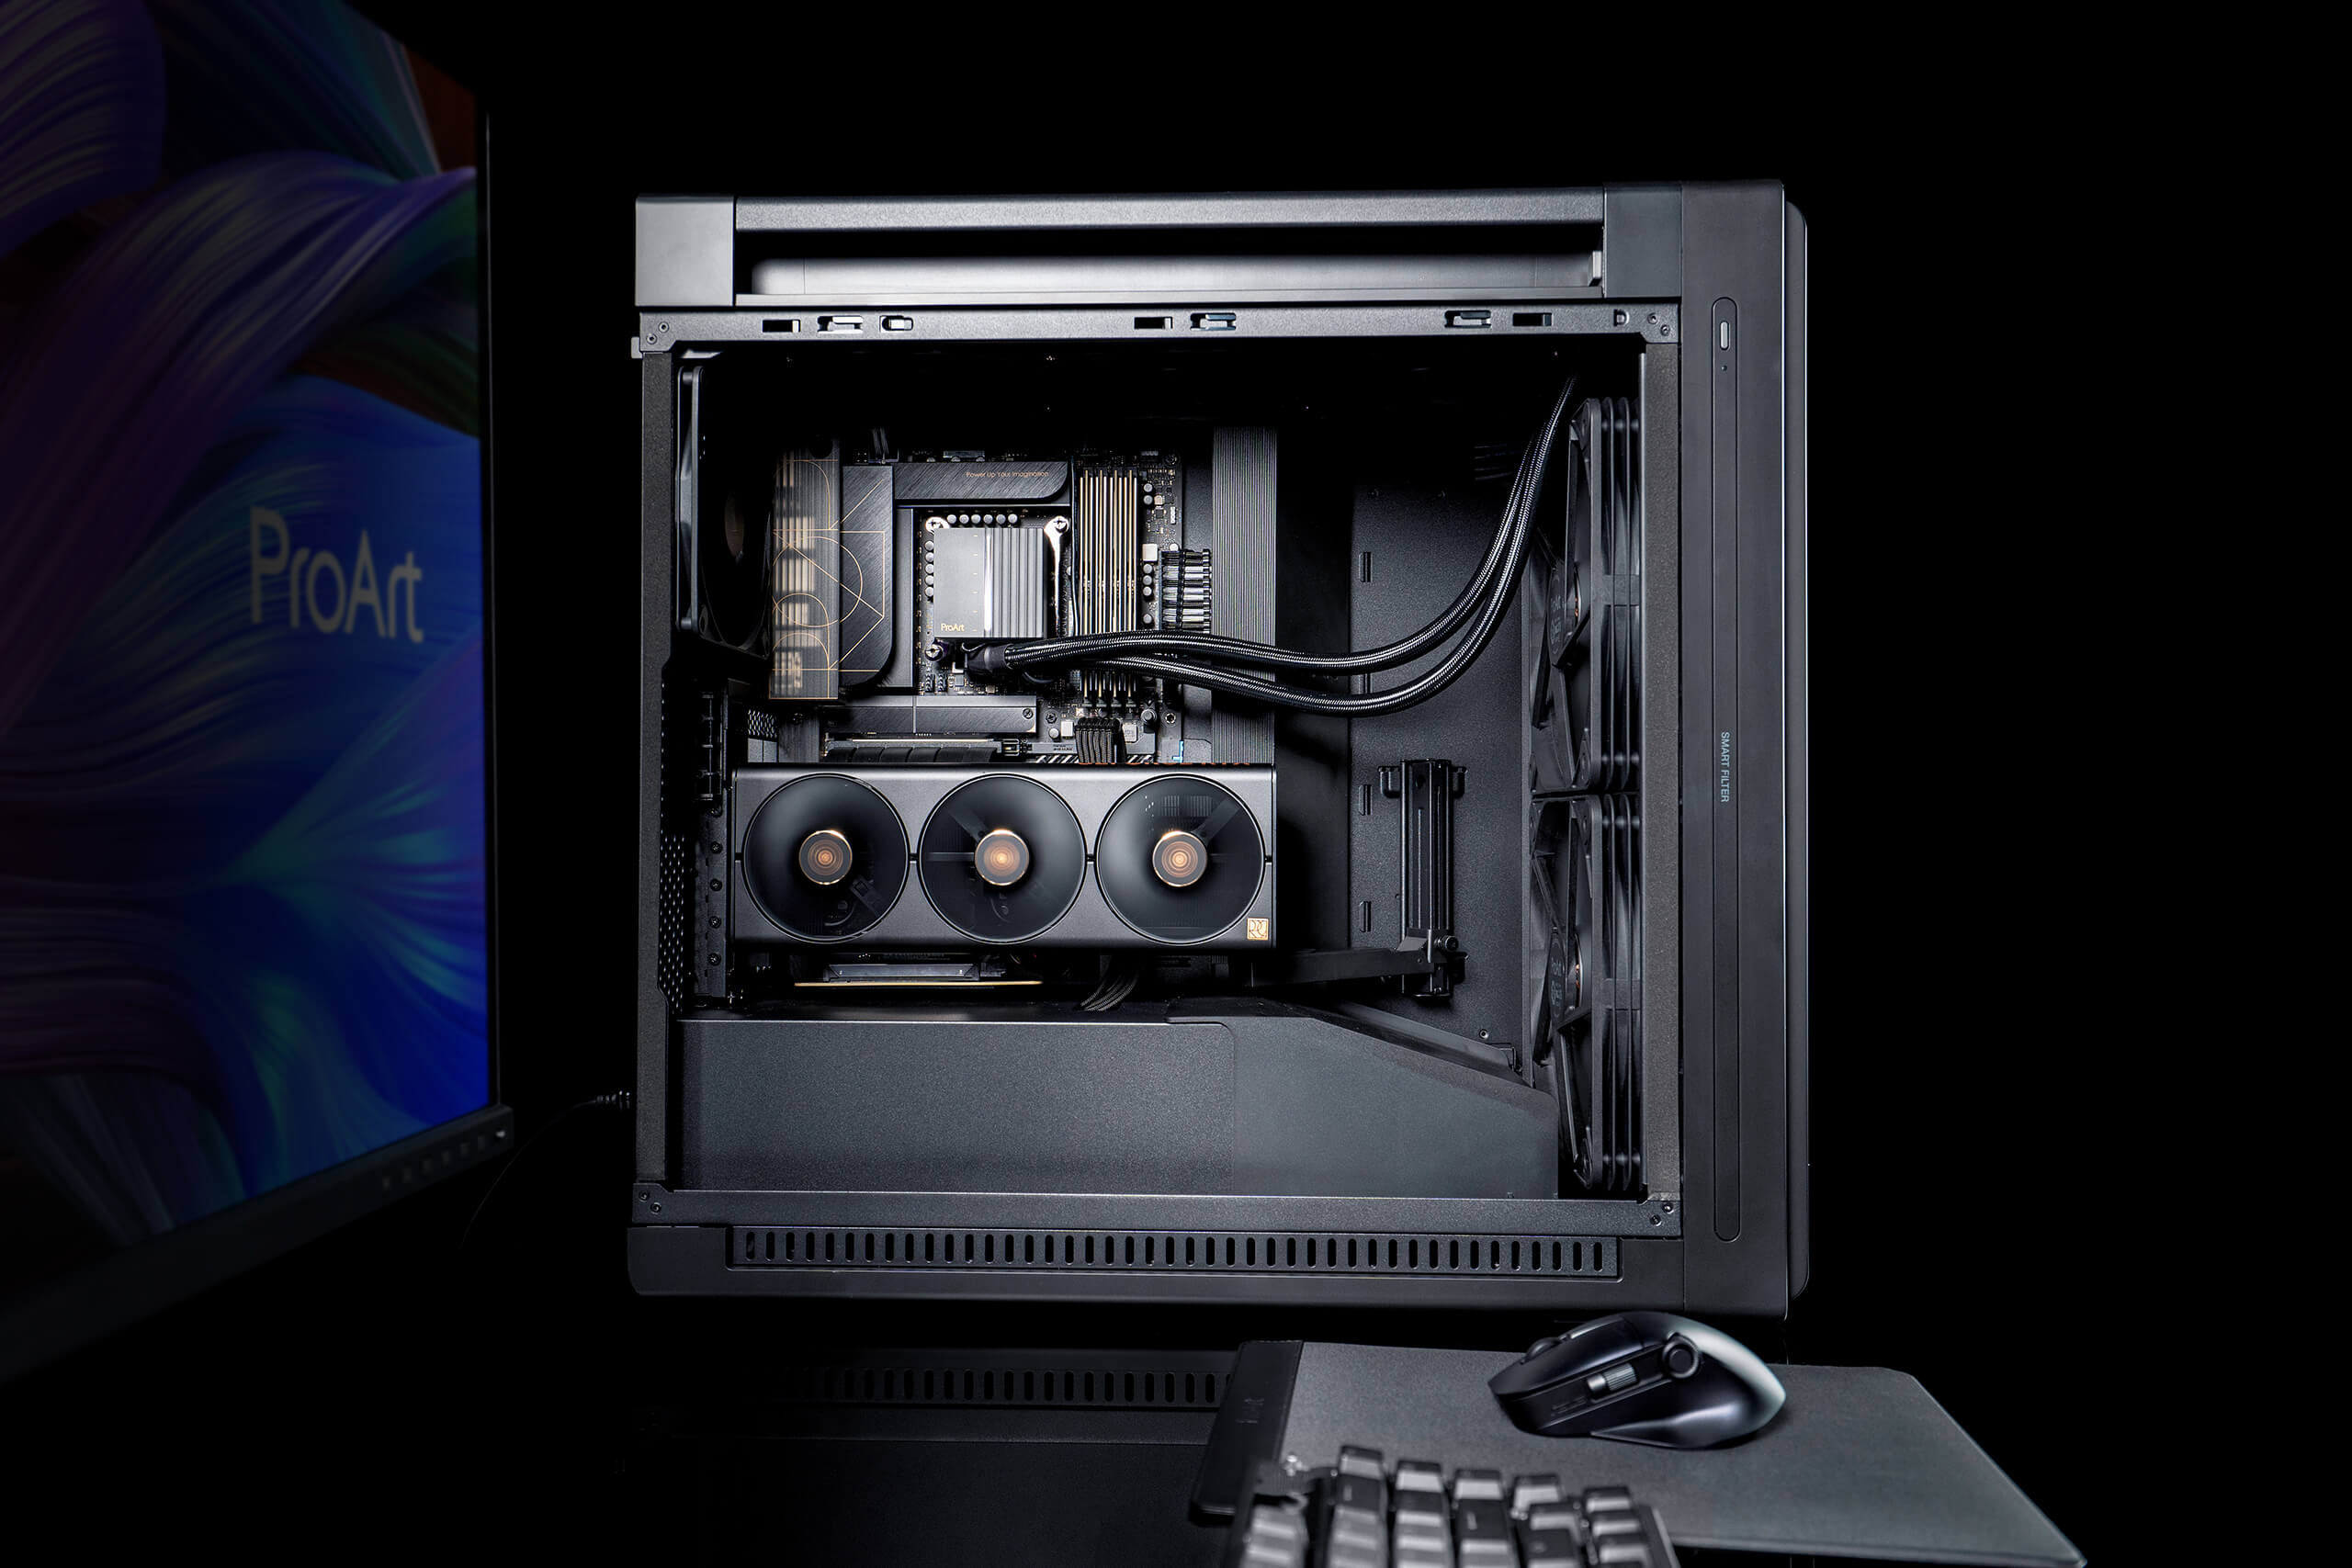 Front view photo of the ProArt LC 360 PC Build.